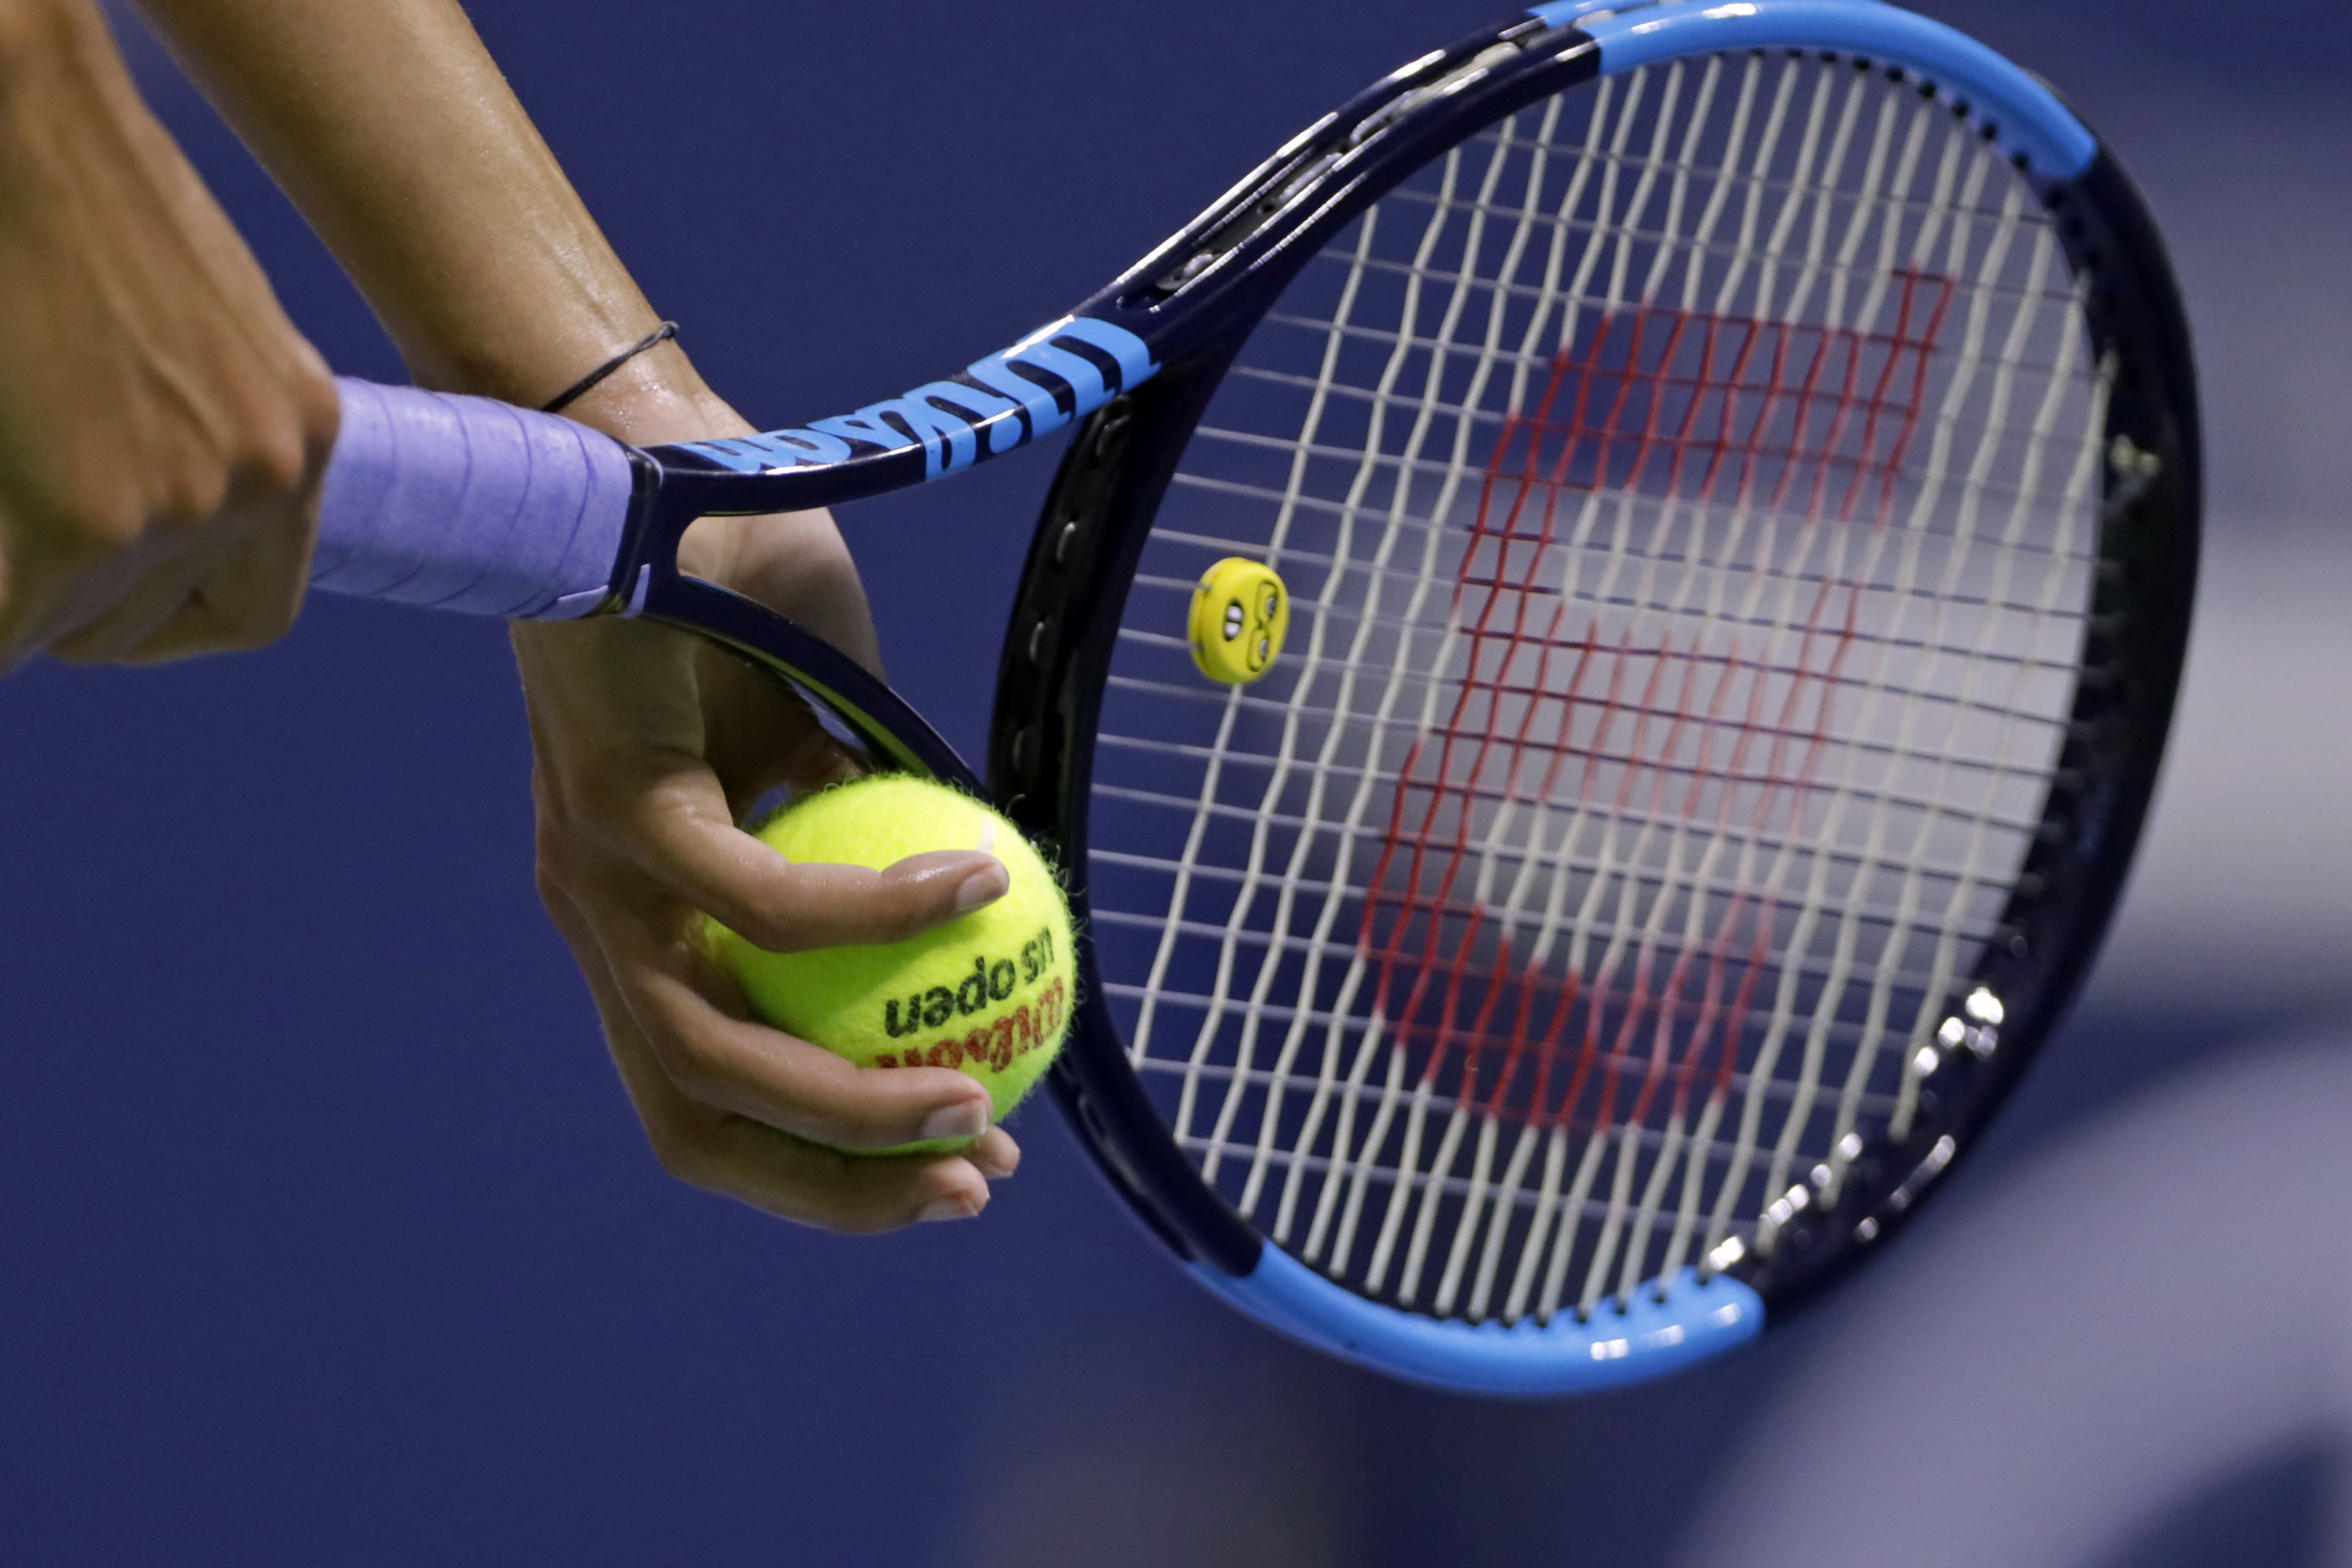 Women’s tennis has signed a multi-year partnership with the Saudi Arabian sovereign wealth fund. Photo: AP